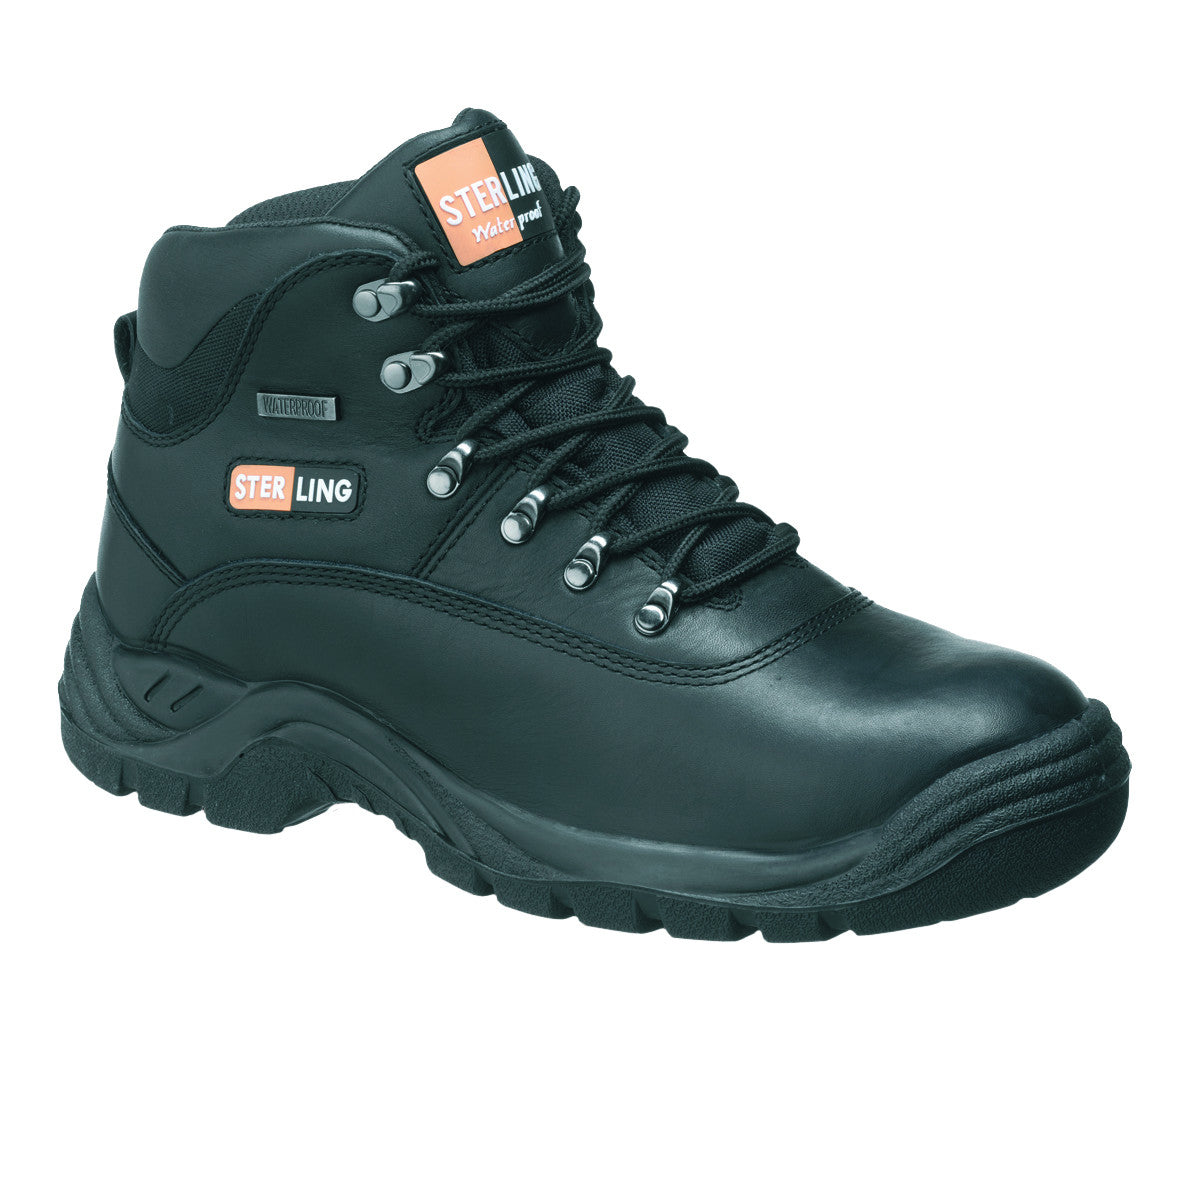 Safety Boot - peterdrew.com
